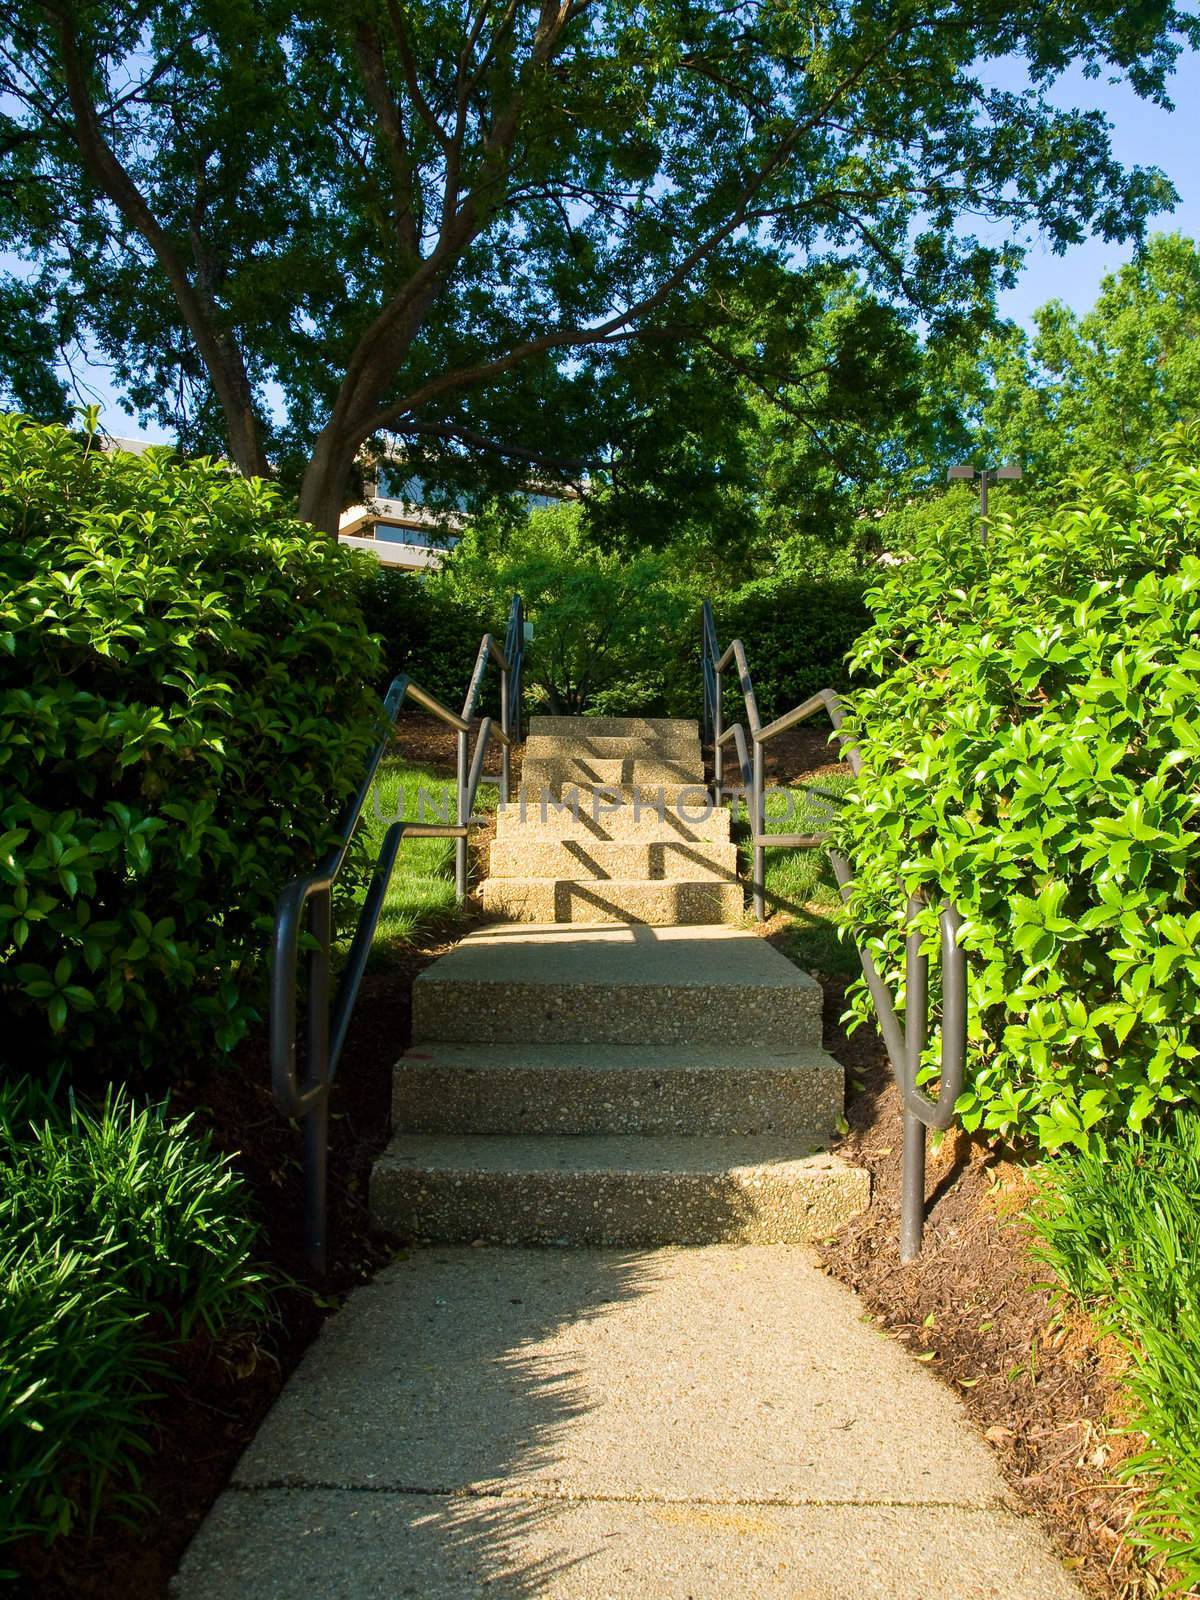 A Concrete Stairway in a Landscaped Park